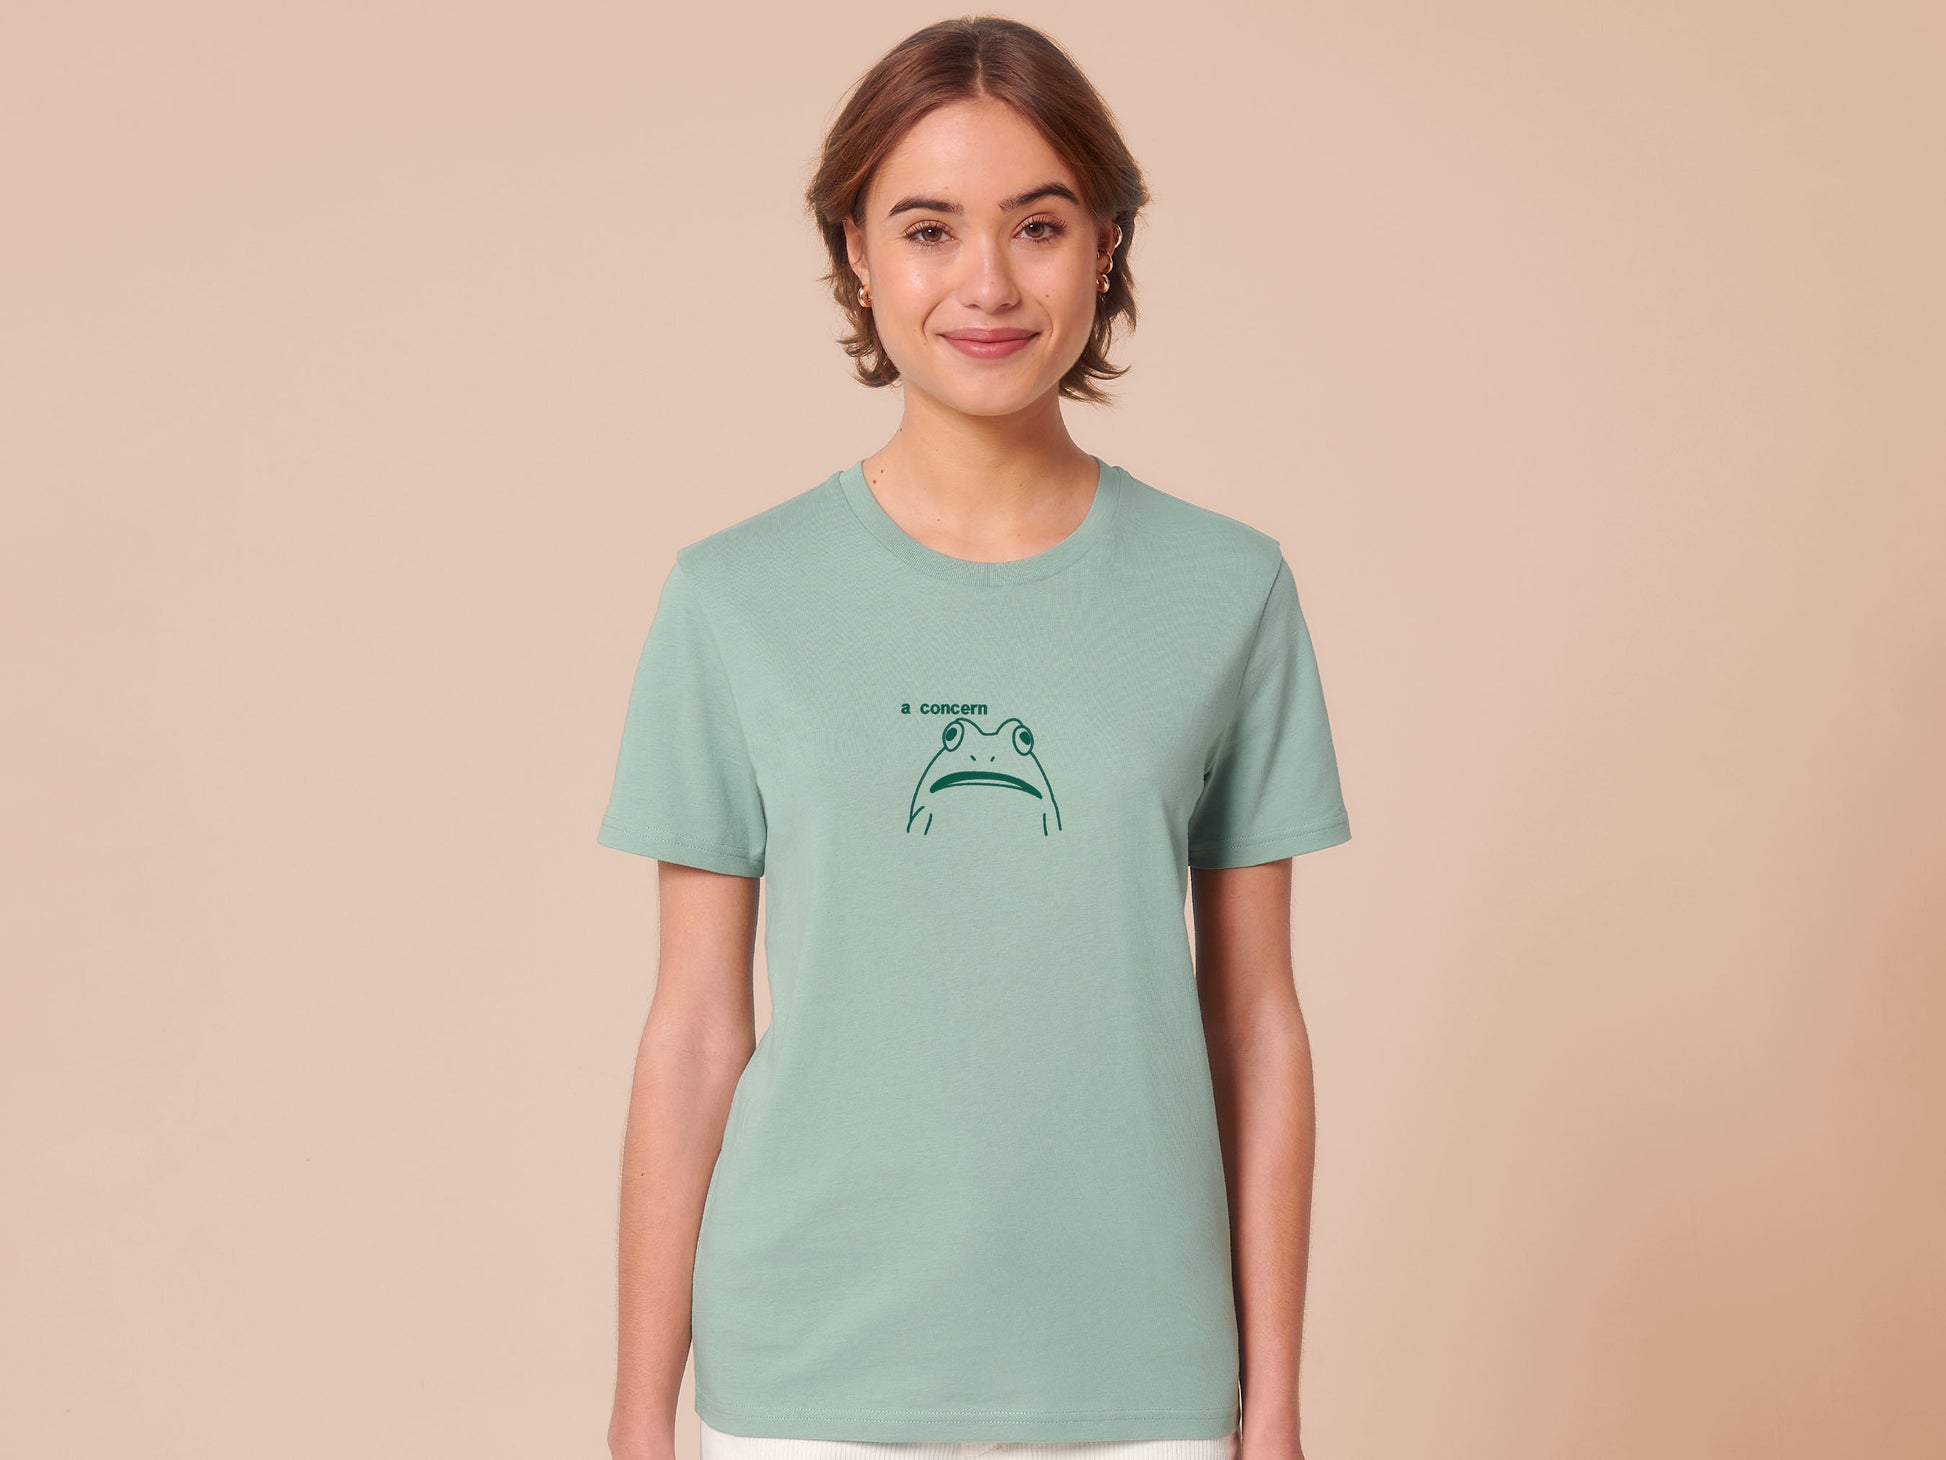 A woman wearing a green crew neck short sleeve t-shirt, with an embroidered green thread design of cute confused looking frog with the text a concern.